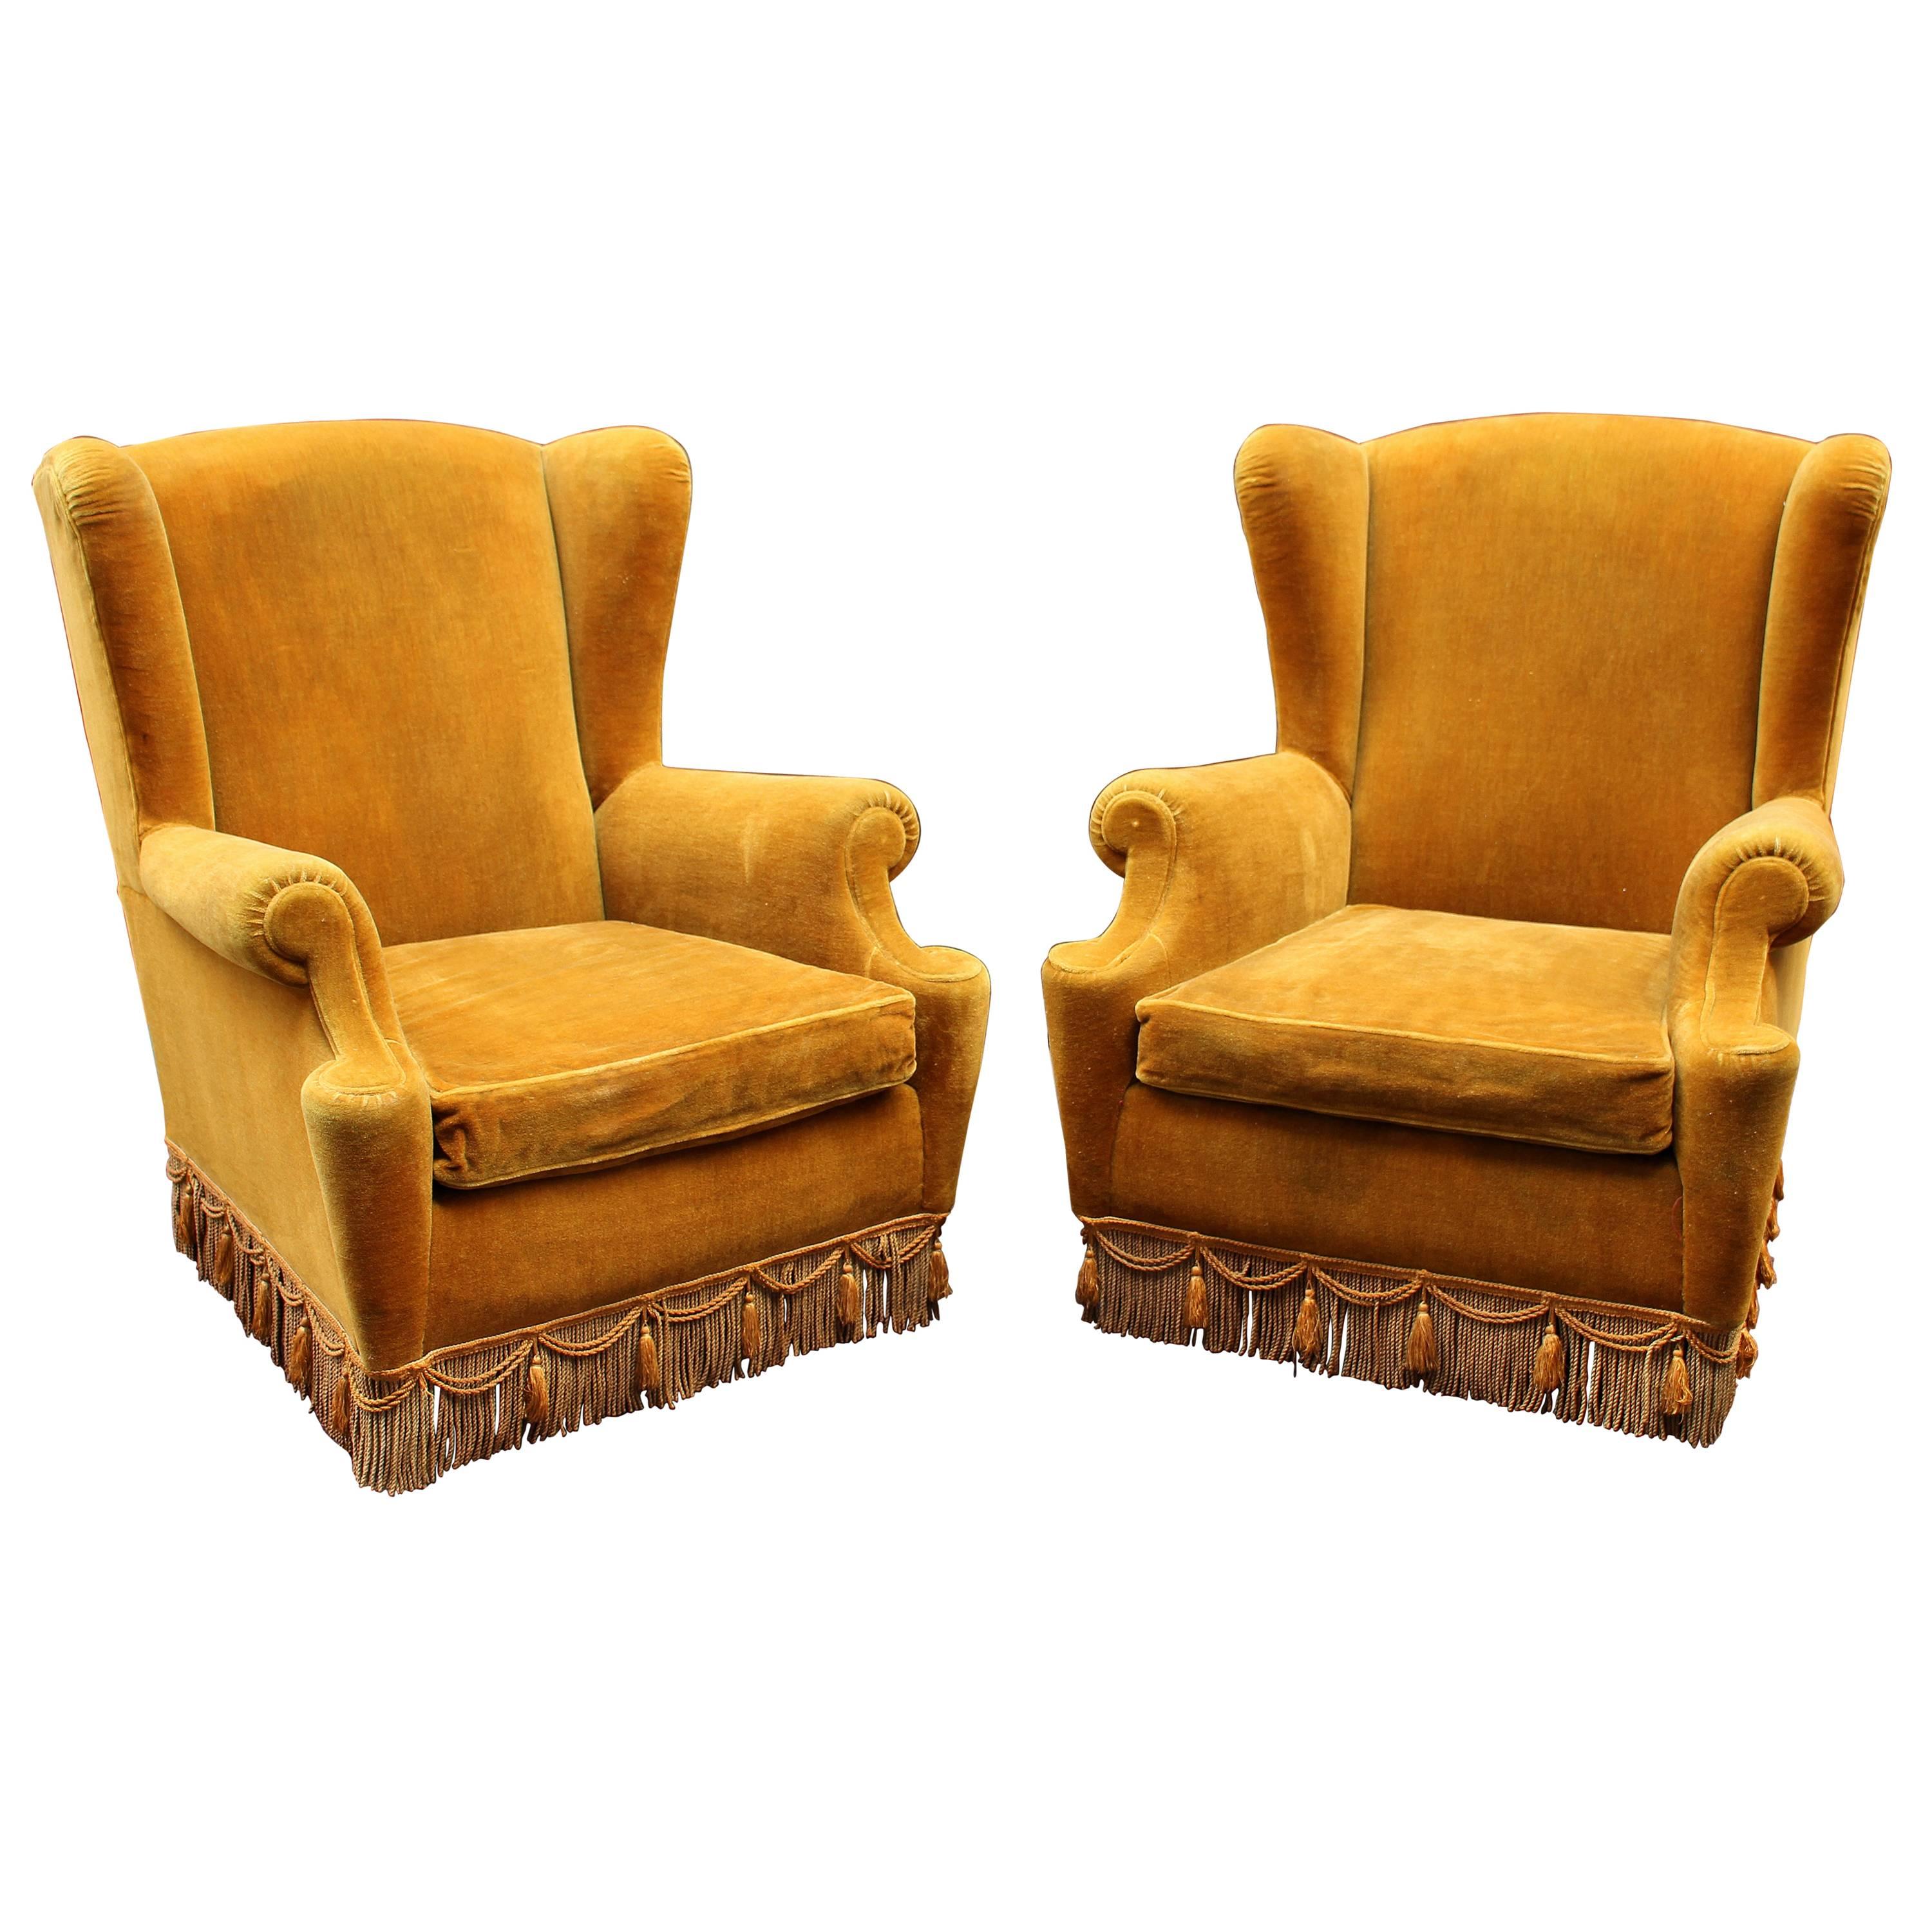 Italian Pair of High Wing Back Chairs